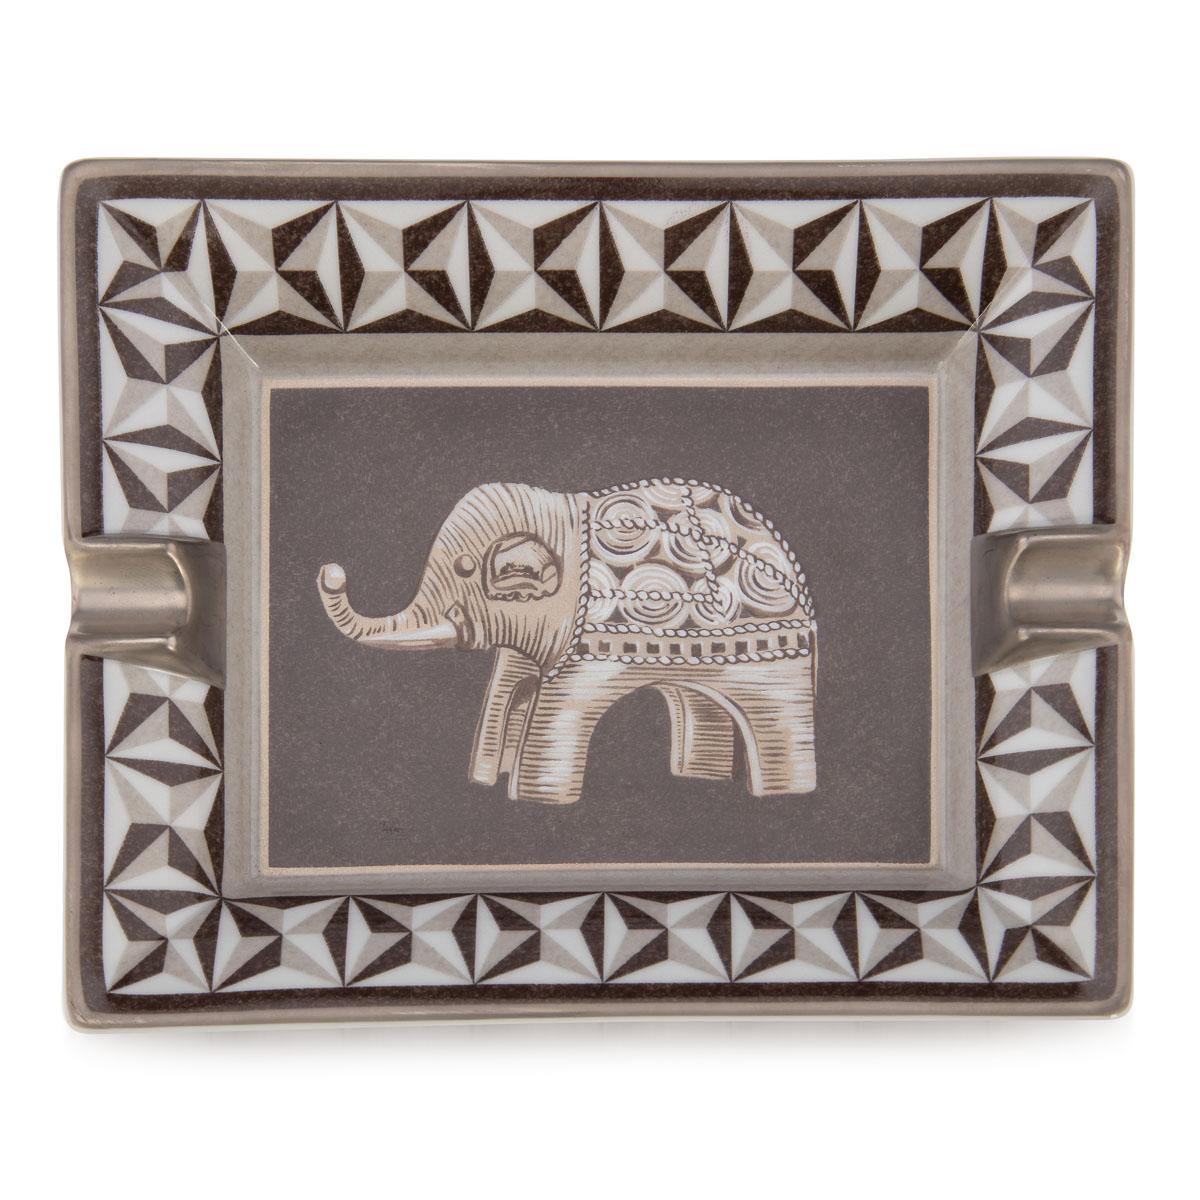 A ceramic ashtray by Hermes, made in France in the latter half of the 20th century. These ashtrays have always been very collectable with the vintage models in particular. This one has a lovely Indian elephant theme but at the same time typically